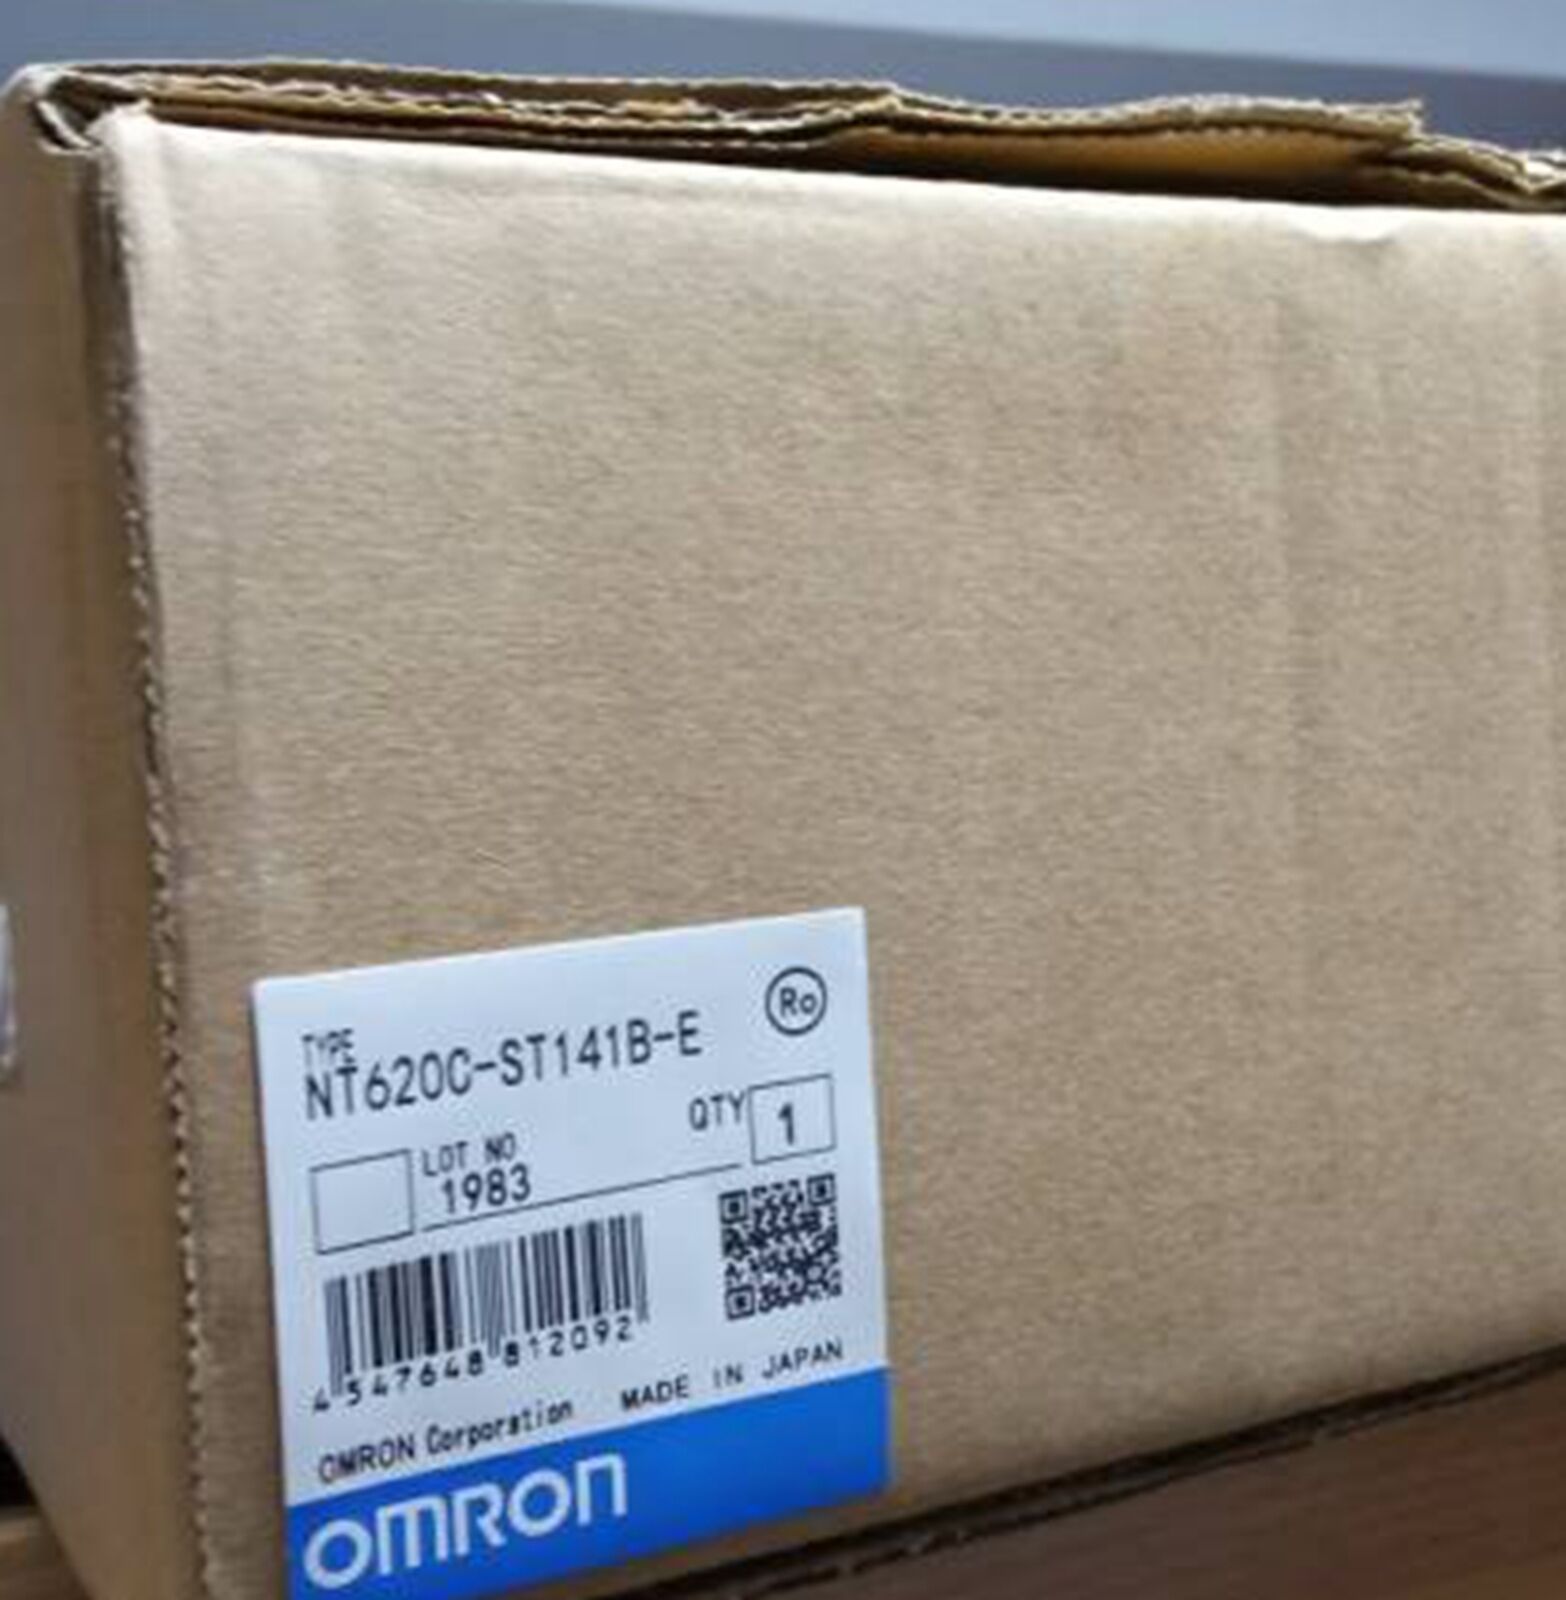 1PC Omron NT620C-ST141B-E Omron NT620CST141BE Touch Screen New DHL Shipping